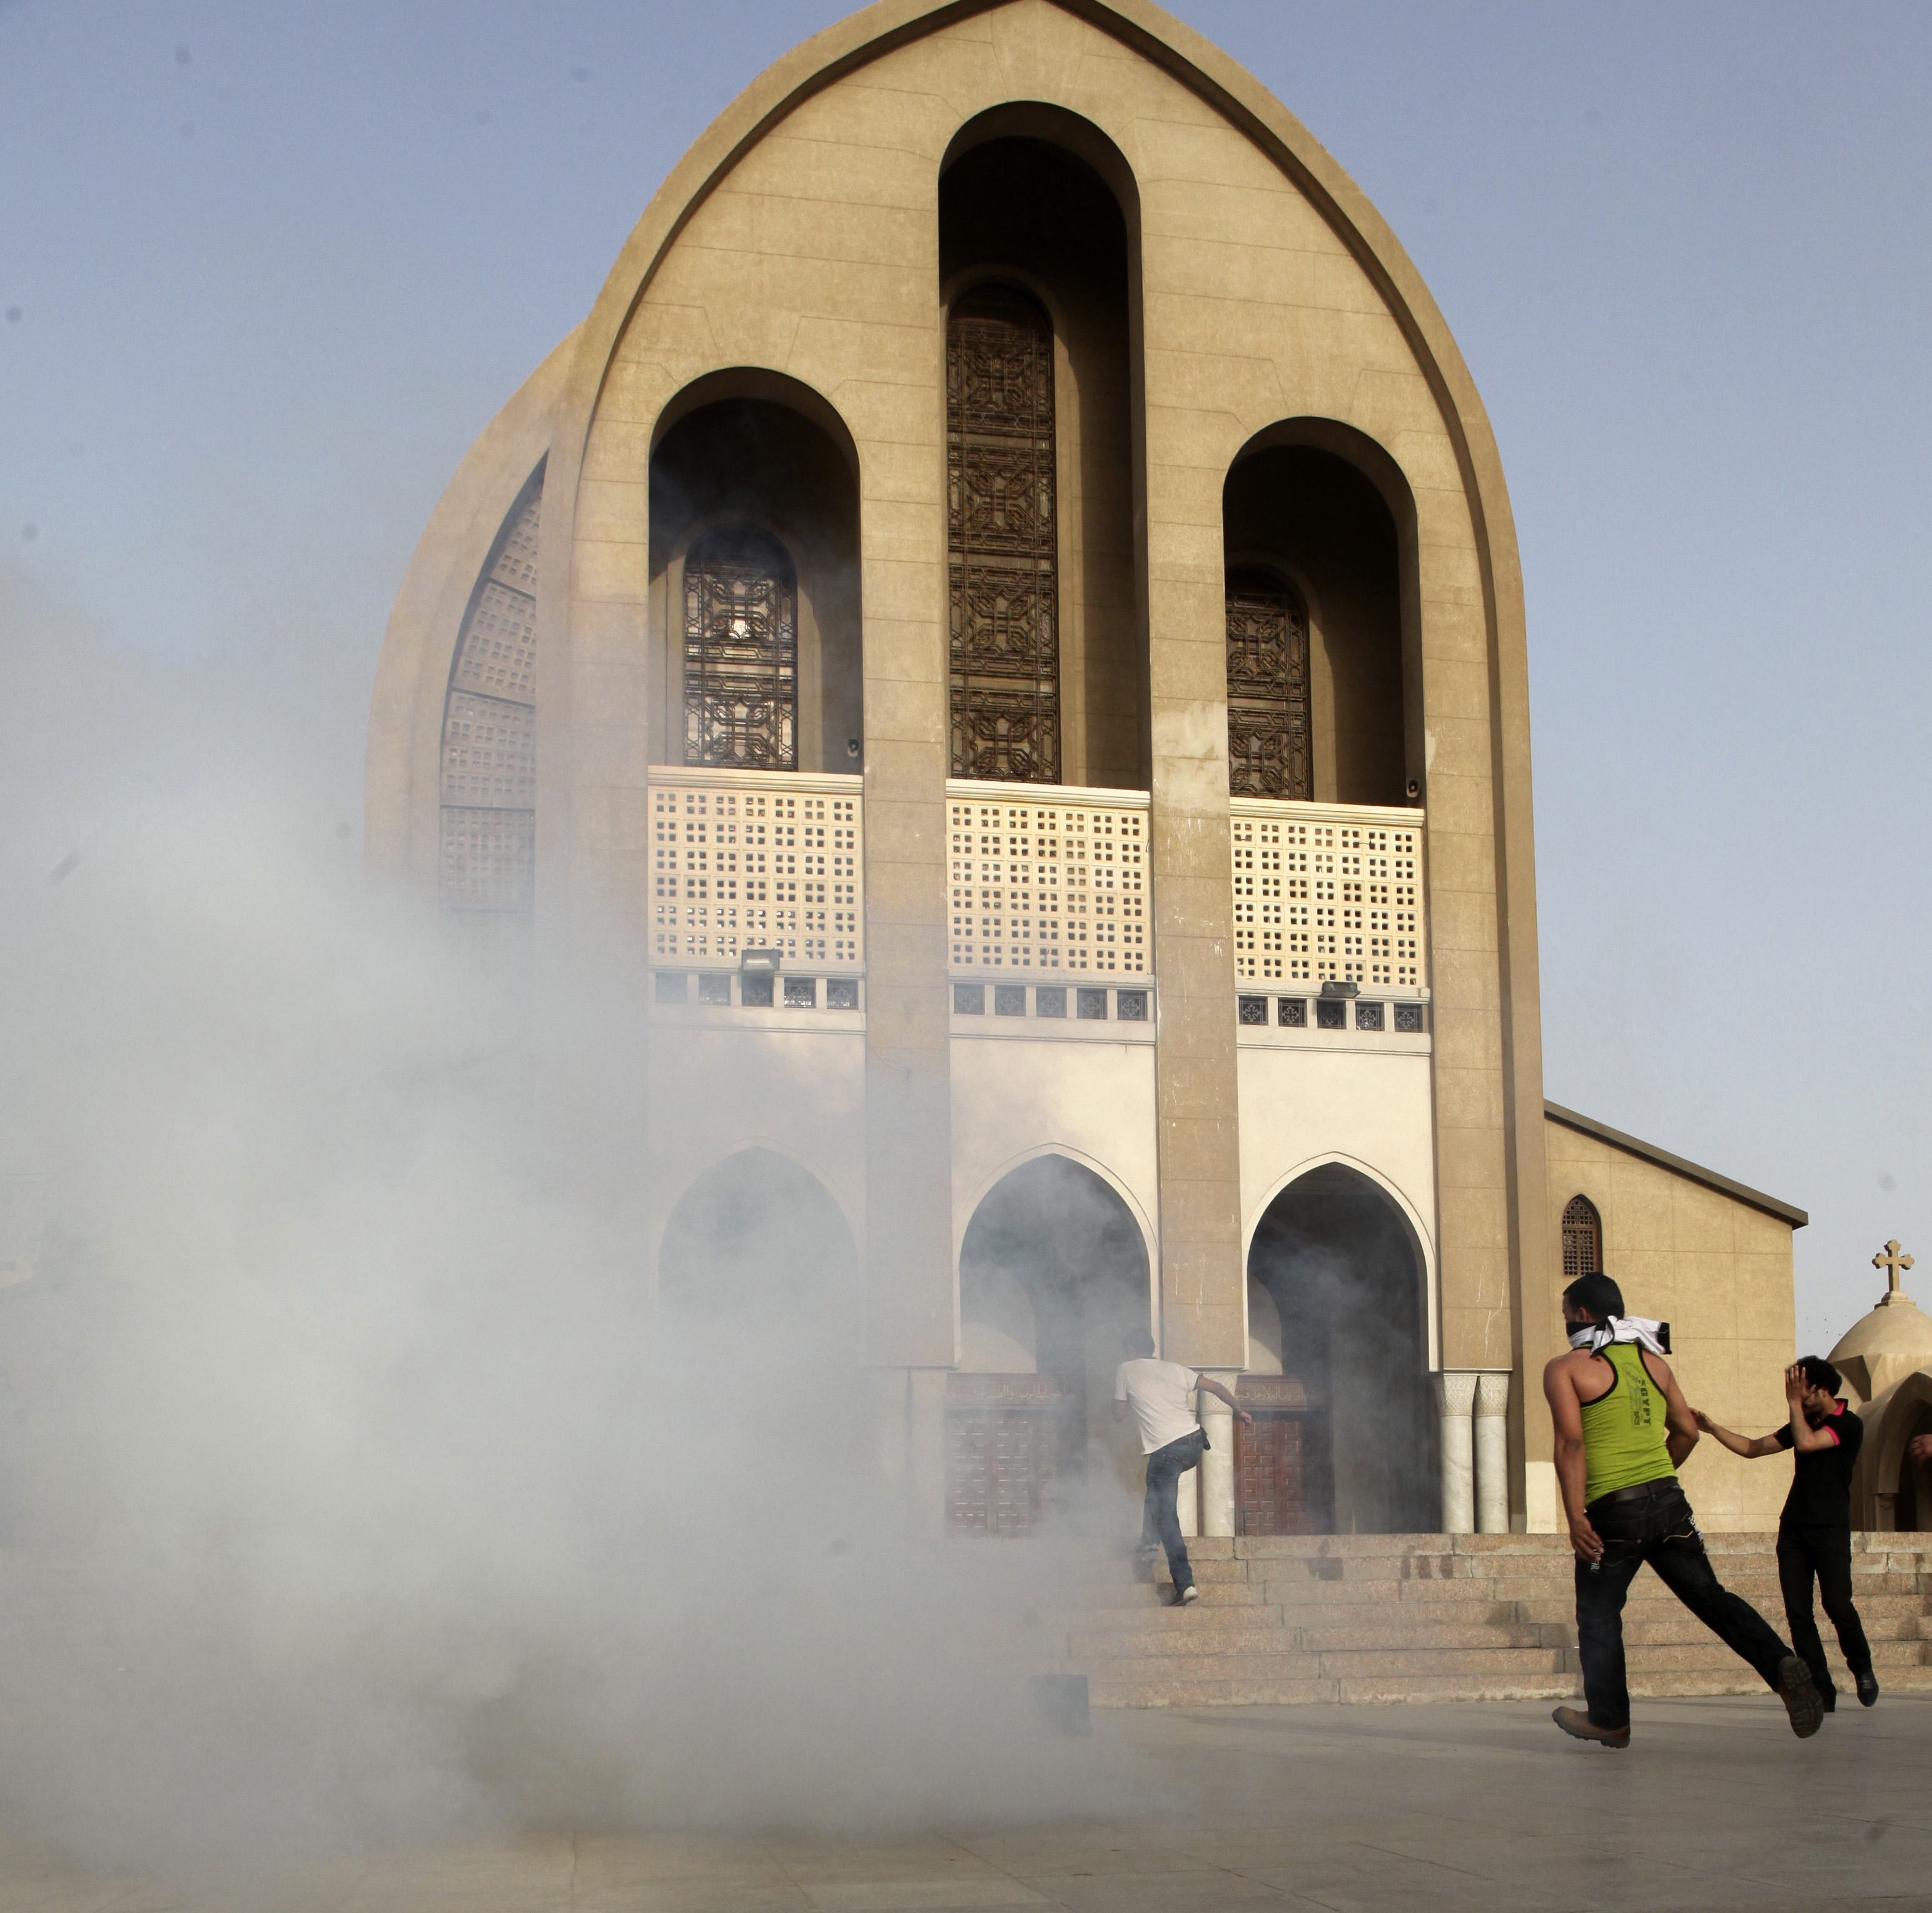 Demands of sacking Interior Minister following cathedral clashes